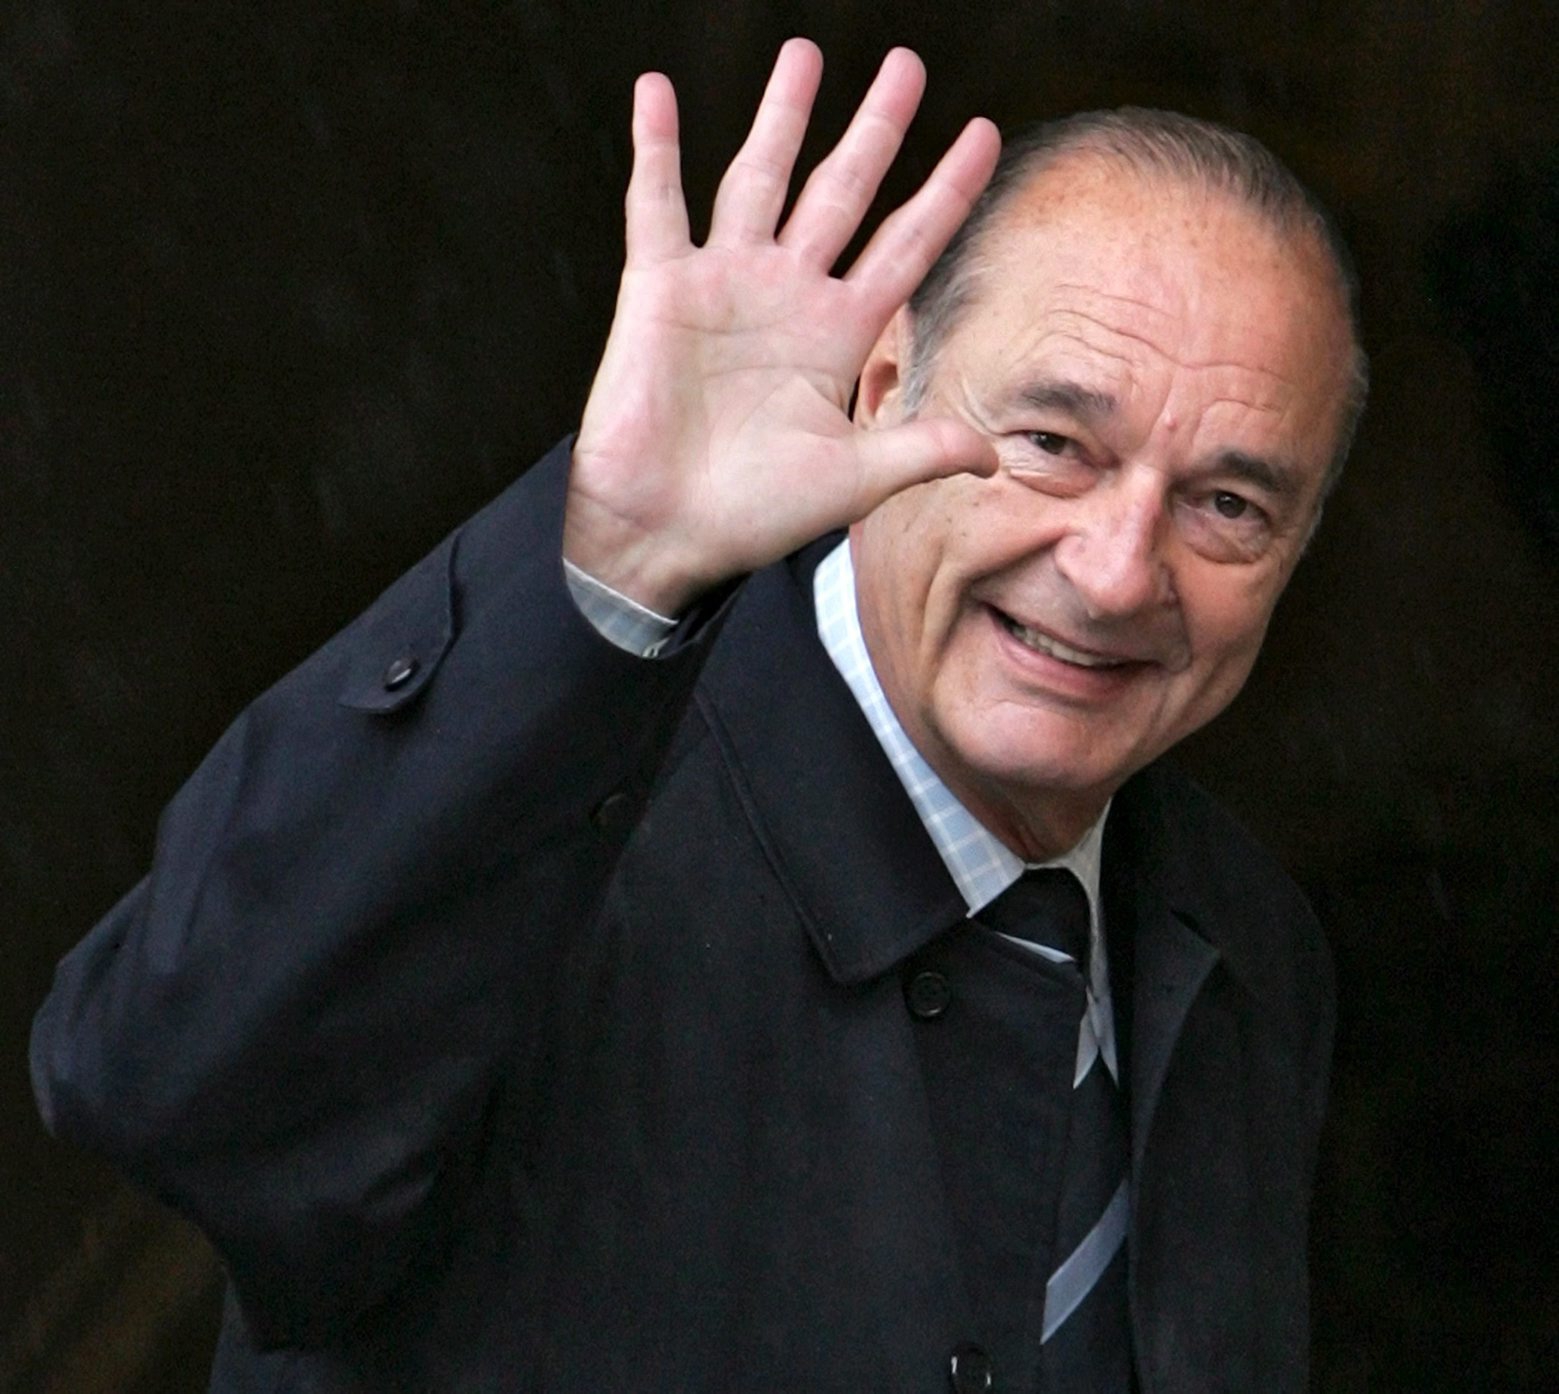 epa07870336 (FILE) -  French President Jacques Chirac arrive for a G8 working session in Konstantinovsky Palace, in St Petersburg, Russia, 17 July 2006 (reissued 26 September 2019). According to reports, former French President Jaques Chirac has died aged 86 on 26 September 2019.  EPA/SERGEI CHIRIKOV (FILE) FRANCE PEOPLE JACQUES CHIRAC OBIT